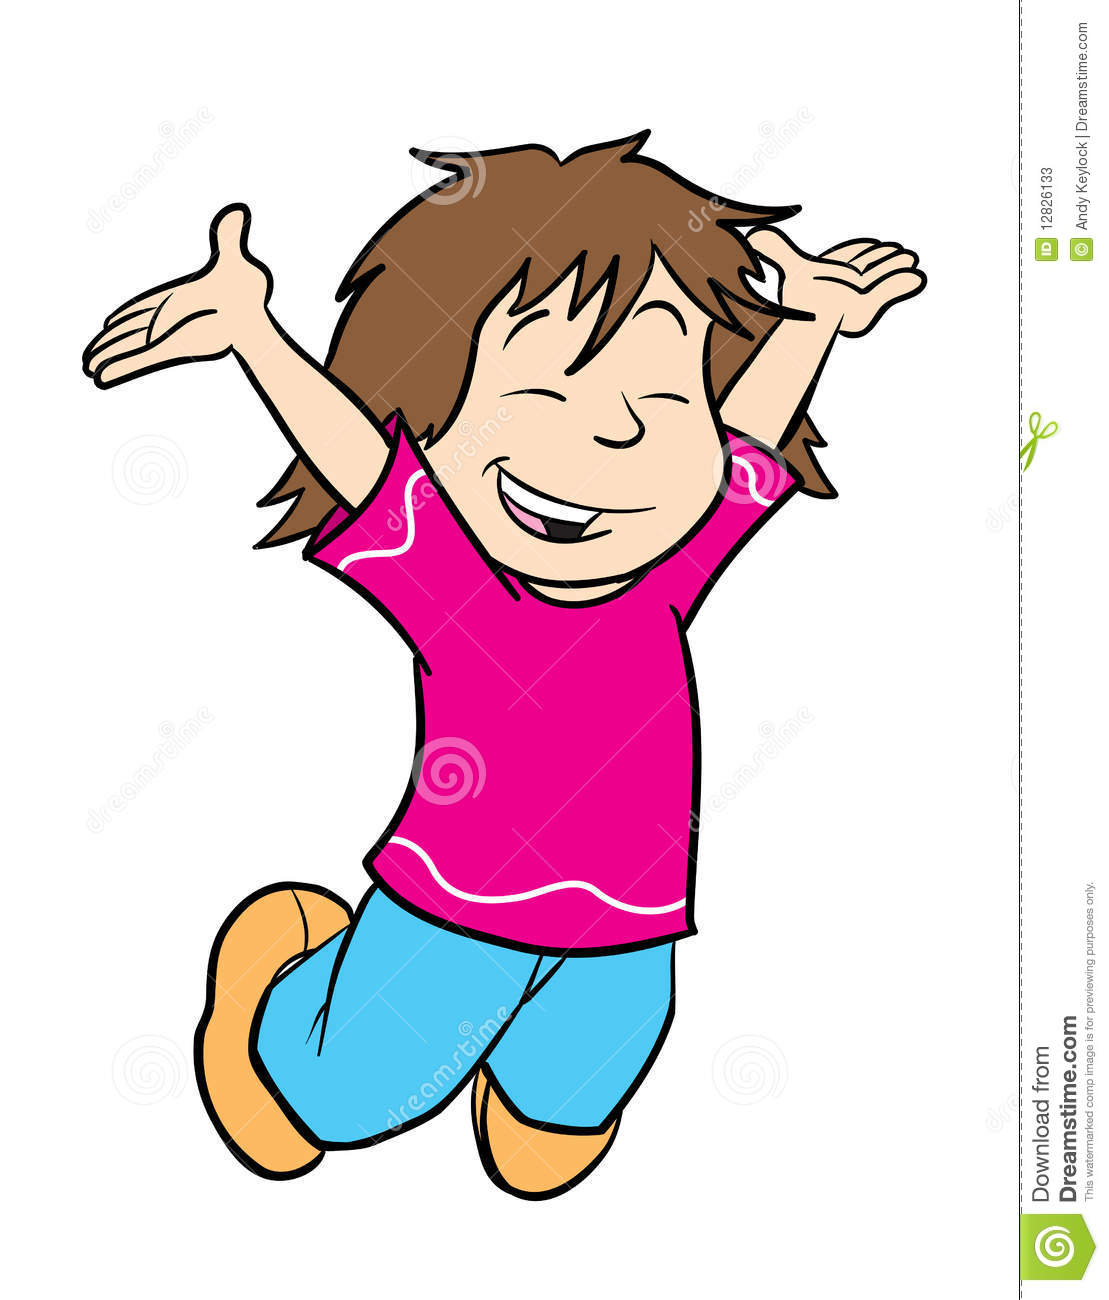 Cartoon Illustration Of A Cute Girl Jumping For Joy With Hands In The